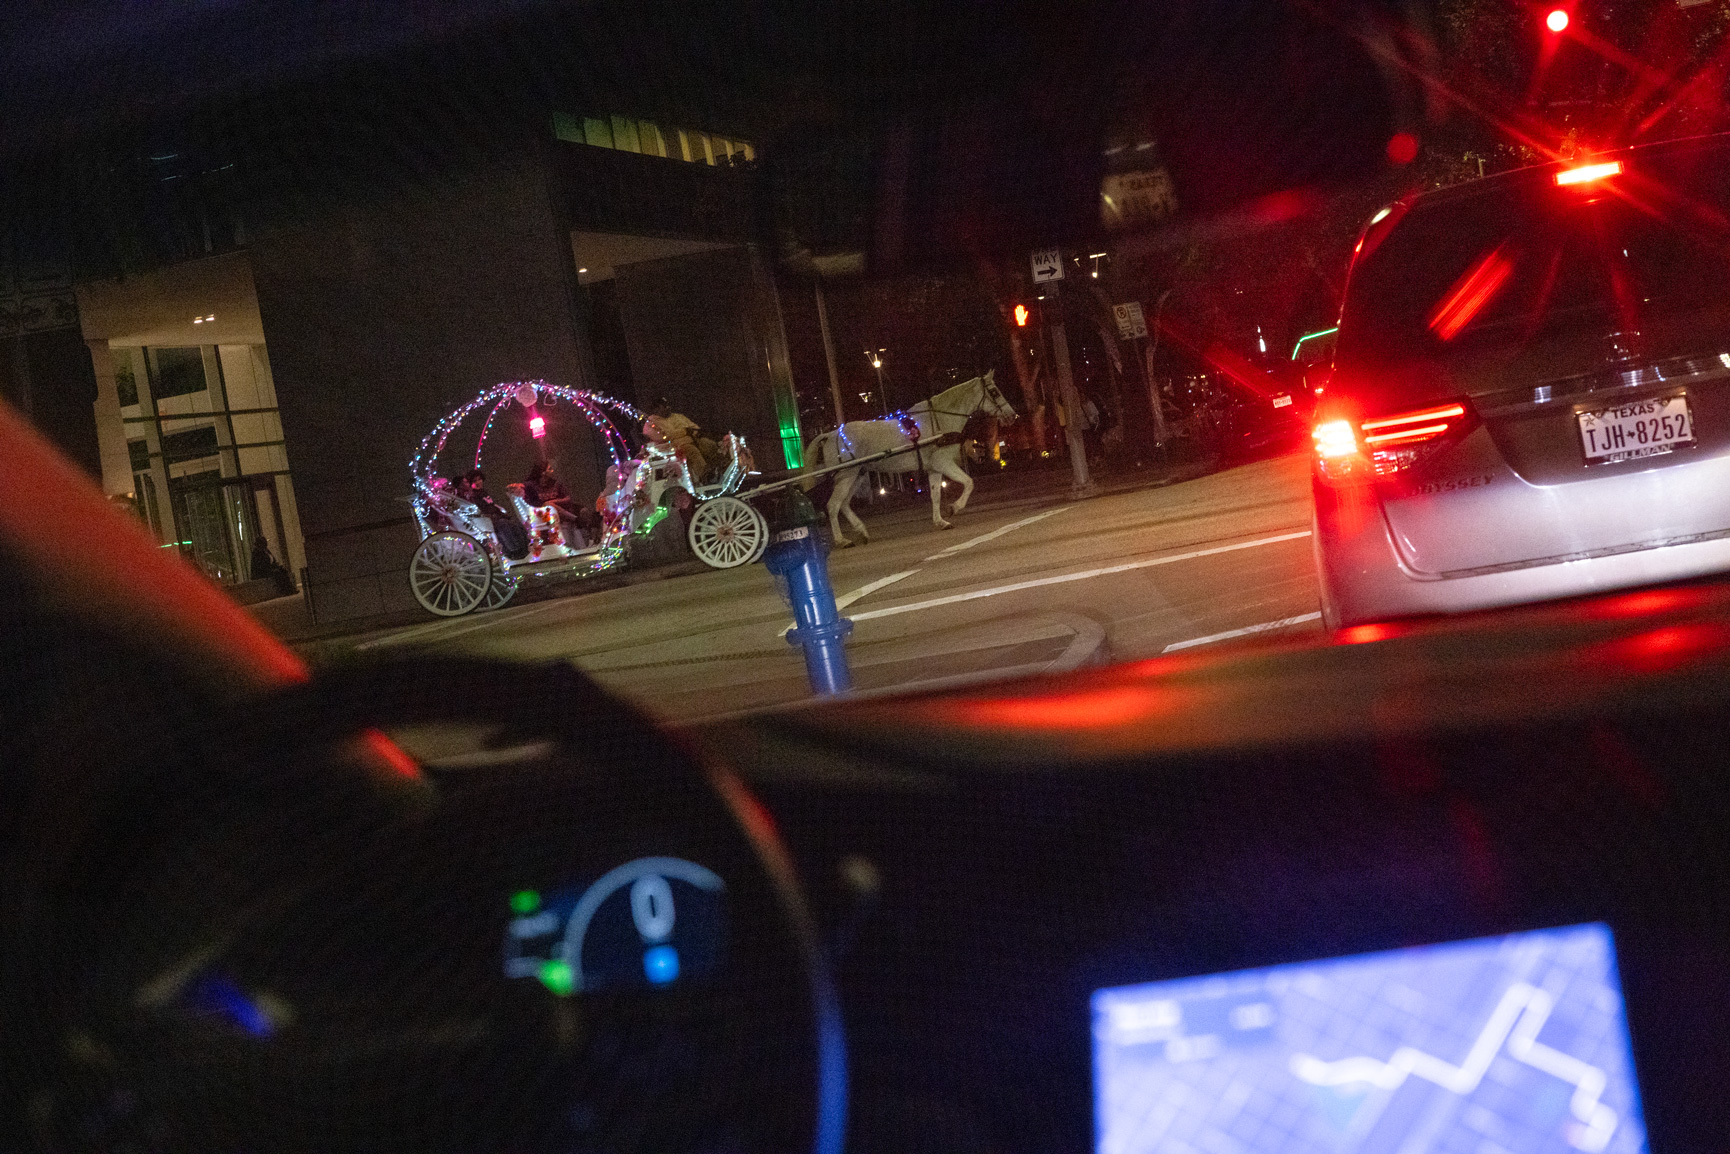 A horse-drawn carriage passes by as a Cruise vehicle waits at a stop light during a ride through downtown Houston